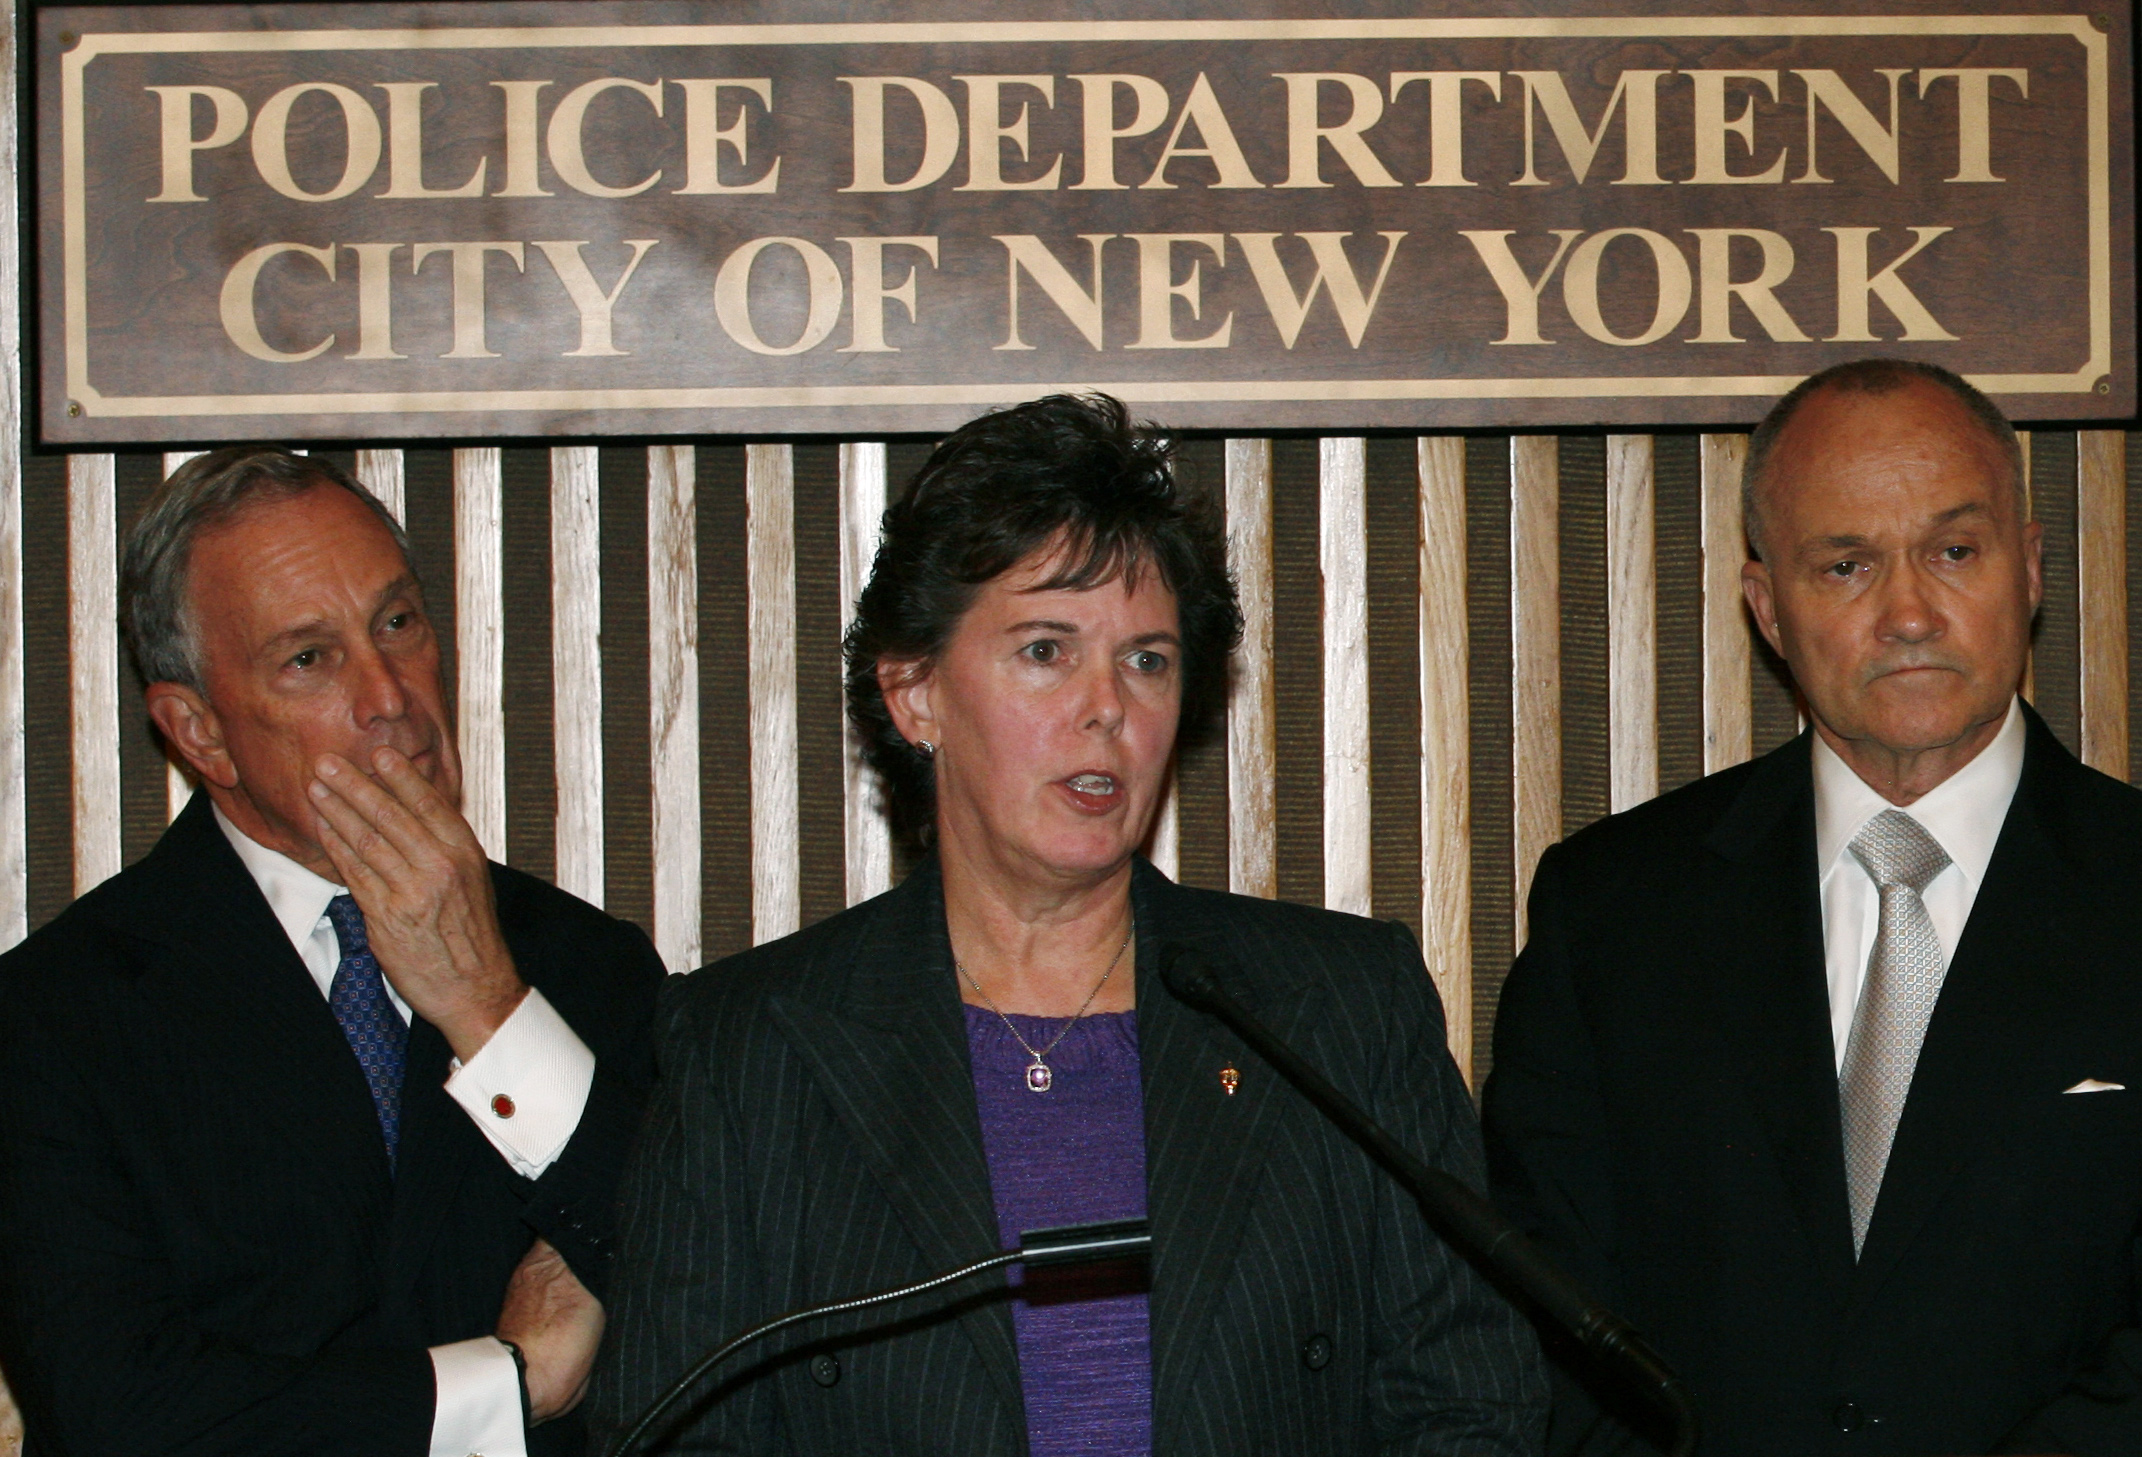 Janice Fedarcyk, center, assistant director of the FBI's New York office, Mayor Michael Bloomberg, left, and Police Commissioner Raymond Kelly hold a news conference, Thursday, Sept. 8, 2011 in New York. They announced a terror threat has been made against New York and Washington. (AP Photo/David Karp)